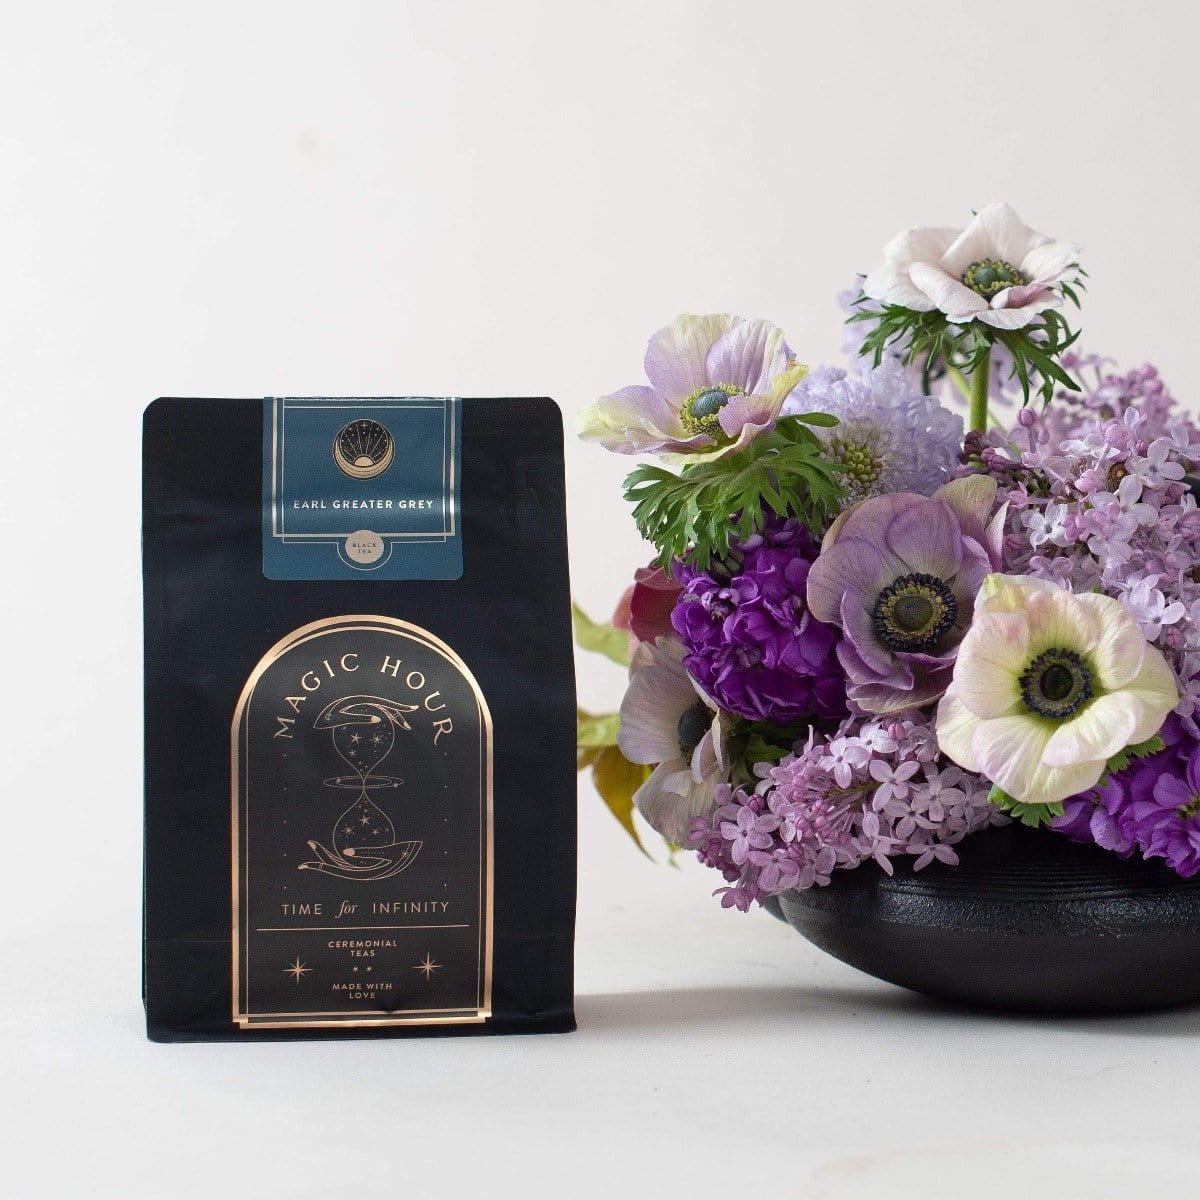 A black package of Magic Hour organic tea sits on a white surface next to a bouquet of purple and white flowers in a black vase. The tea package has a label that reads "Earl Greater Grey: Tea for the Bright & Bold" and "Time & Infinity" with an hourglass graphic, making this loose leaf tea experience timeless.